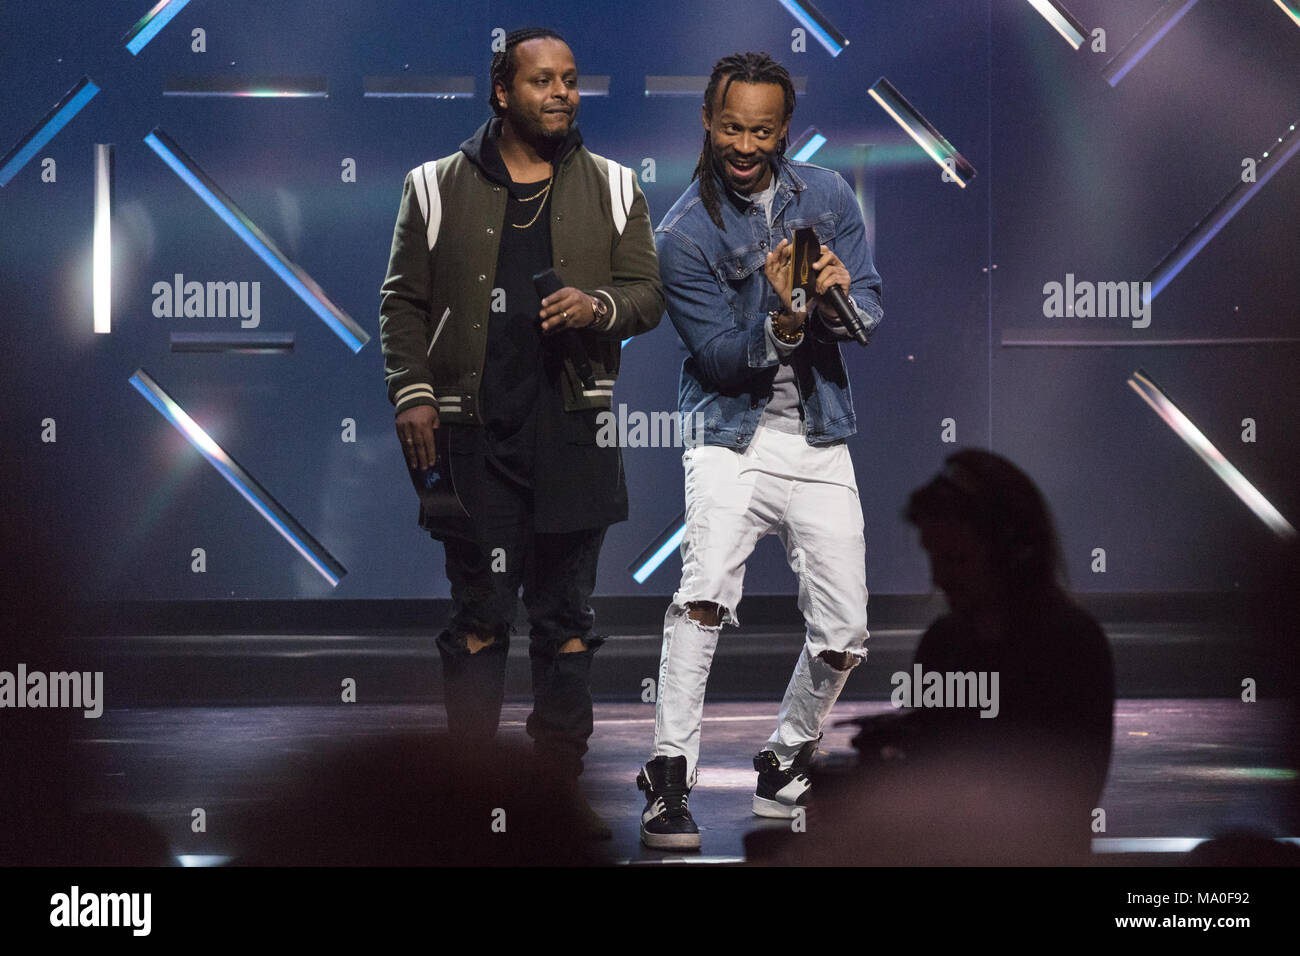 Norway, Oslo - February 25, 2018. The Norwegian musical duo Madcon presents an award during the Norwegian Grammy Awards, Spellemannprisen 2017, at Oslo Konserthus in Oslo. (Photo credit: Gonzales Photo - Stian S. Moller). Stock Photo